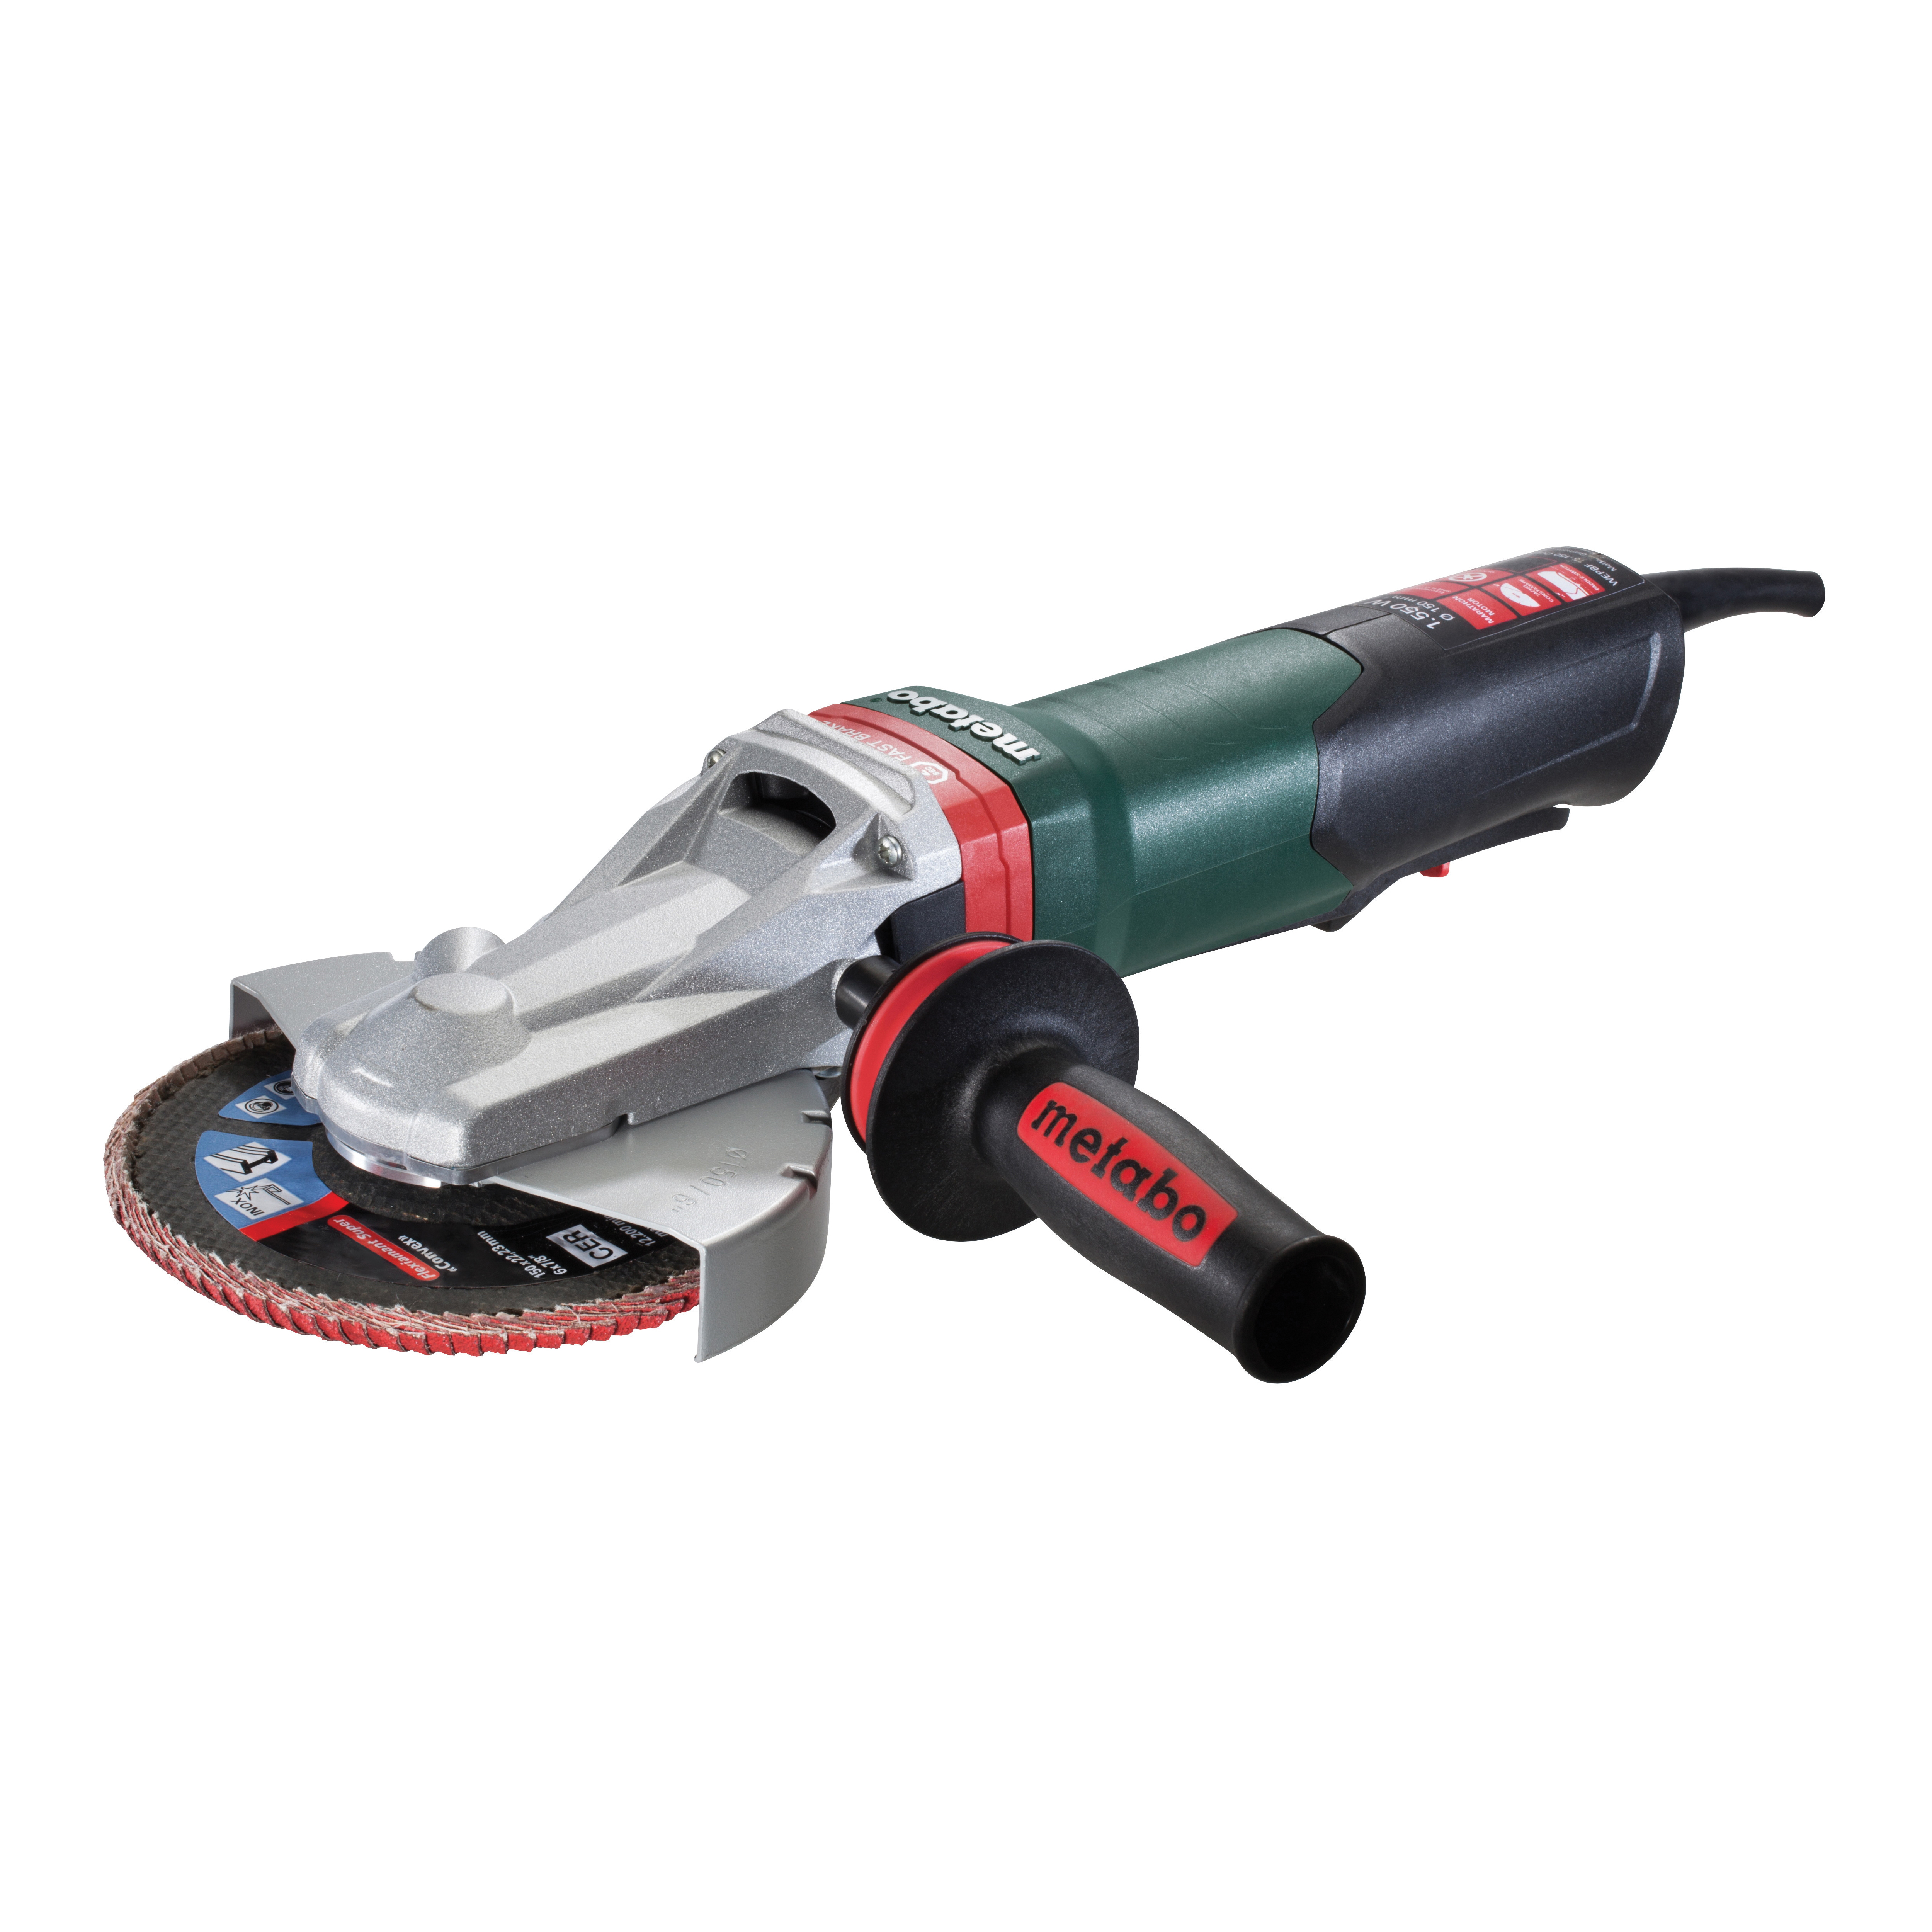 metabo® 606466420 Electric Angle Grinder, 7 in Dia Wheel, 5/8-11 UNC Arbor/Shank, 110 to 120 VAC